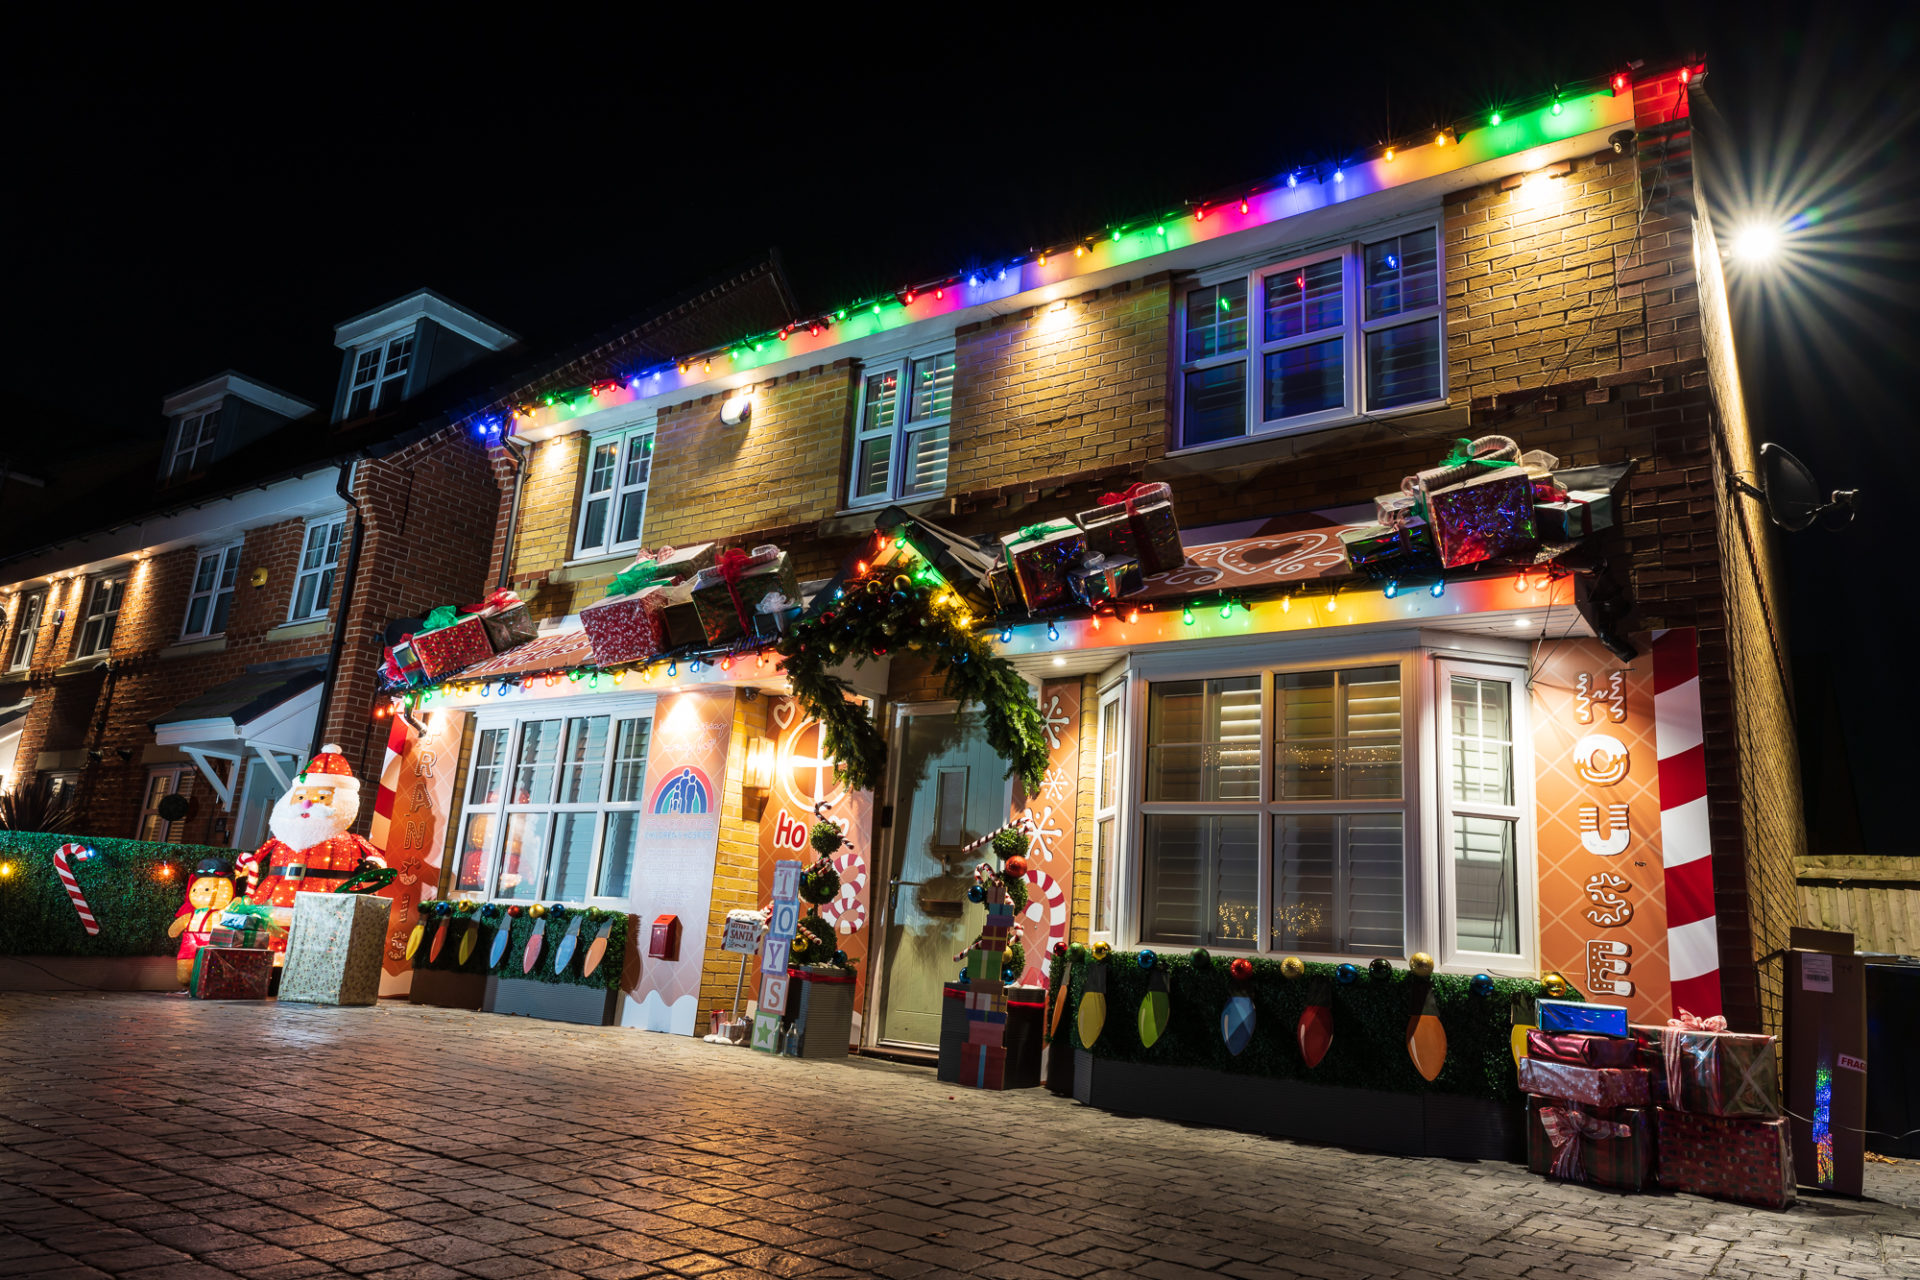 House decorated with lights and Christmas decorations.